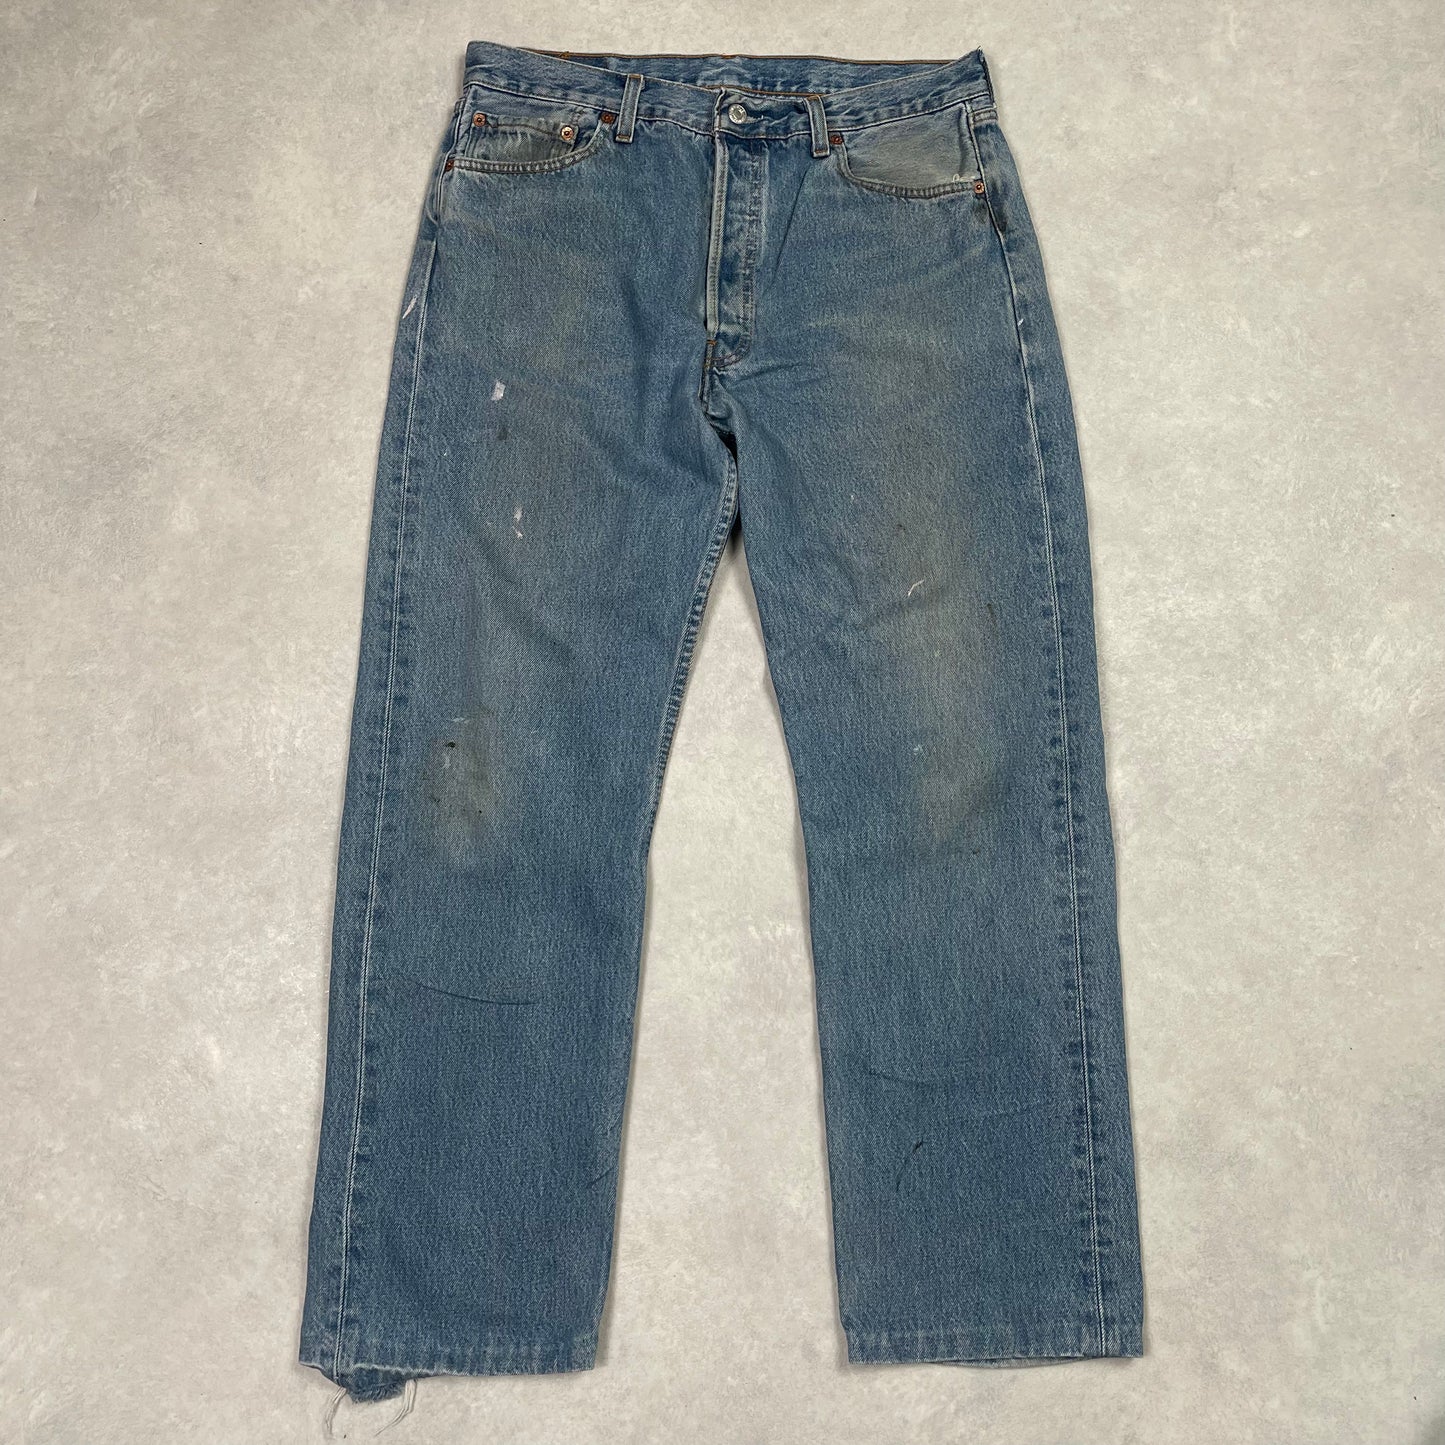 Vintage Levi’s 501 Jeans Paint Stained Made in UK